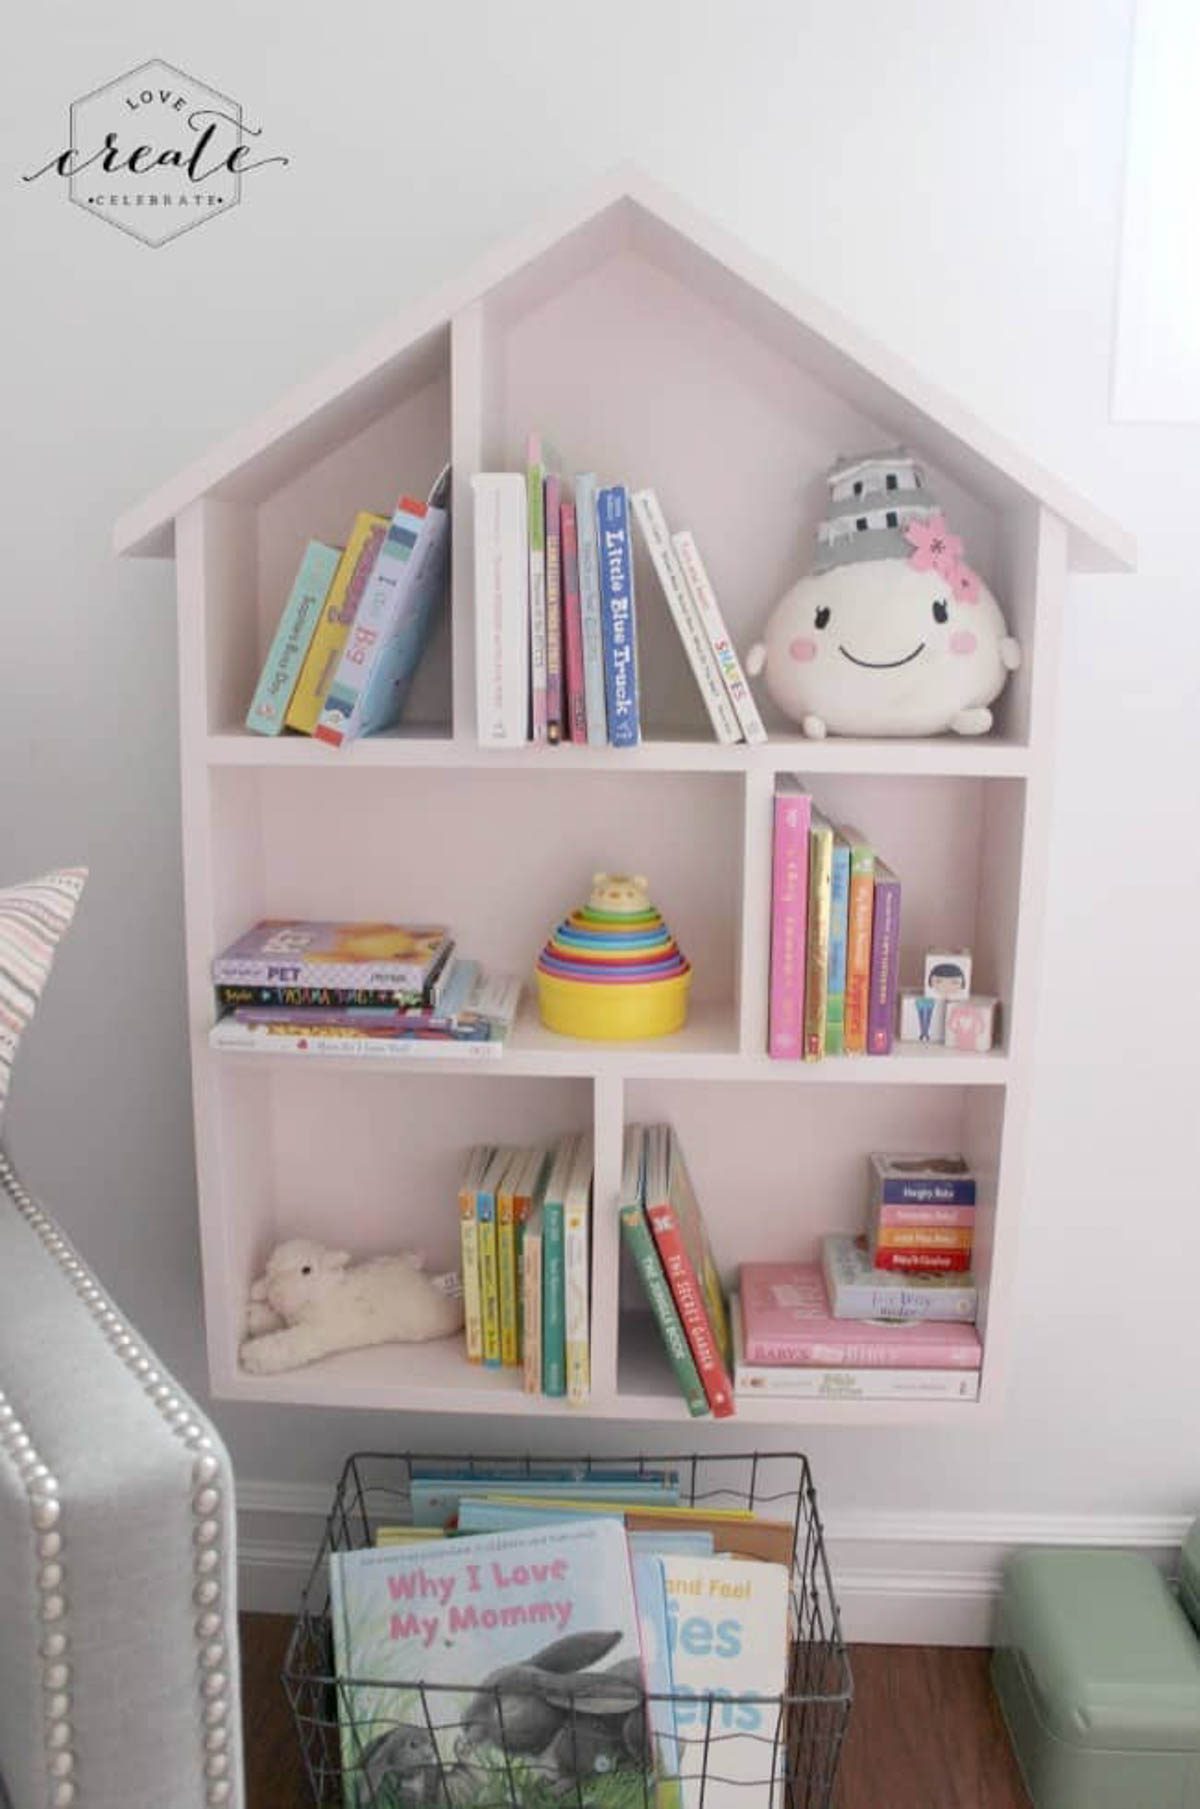 House bookshelf staged with children's books and toys